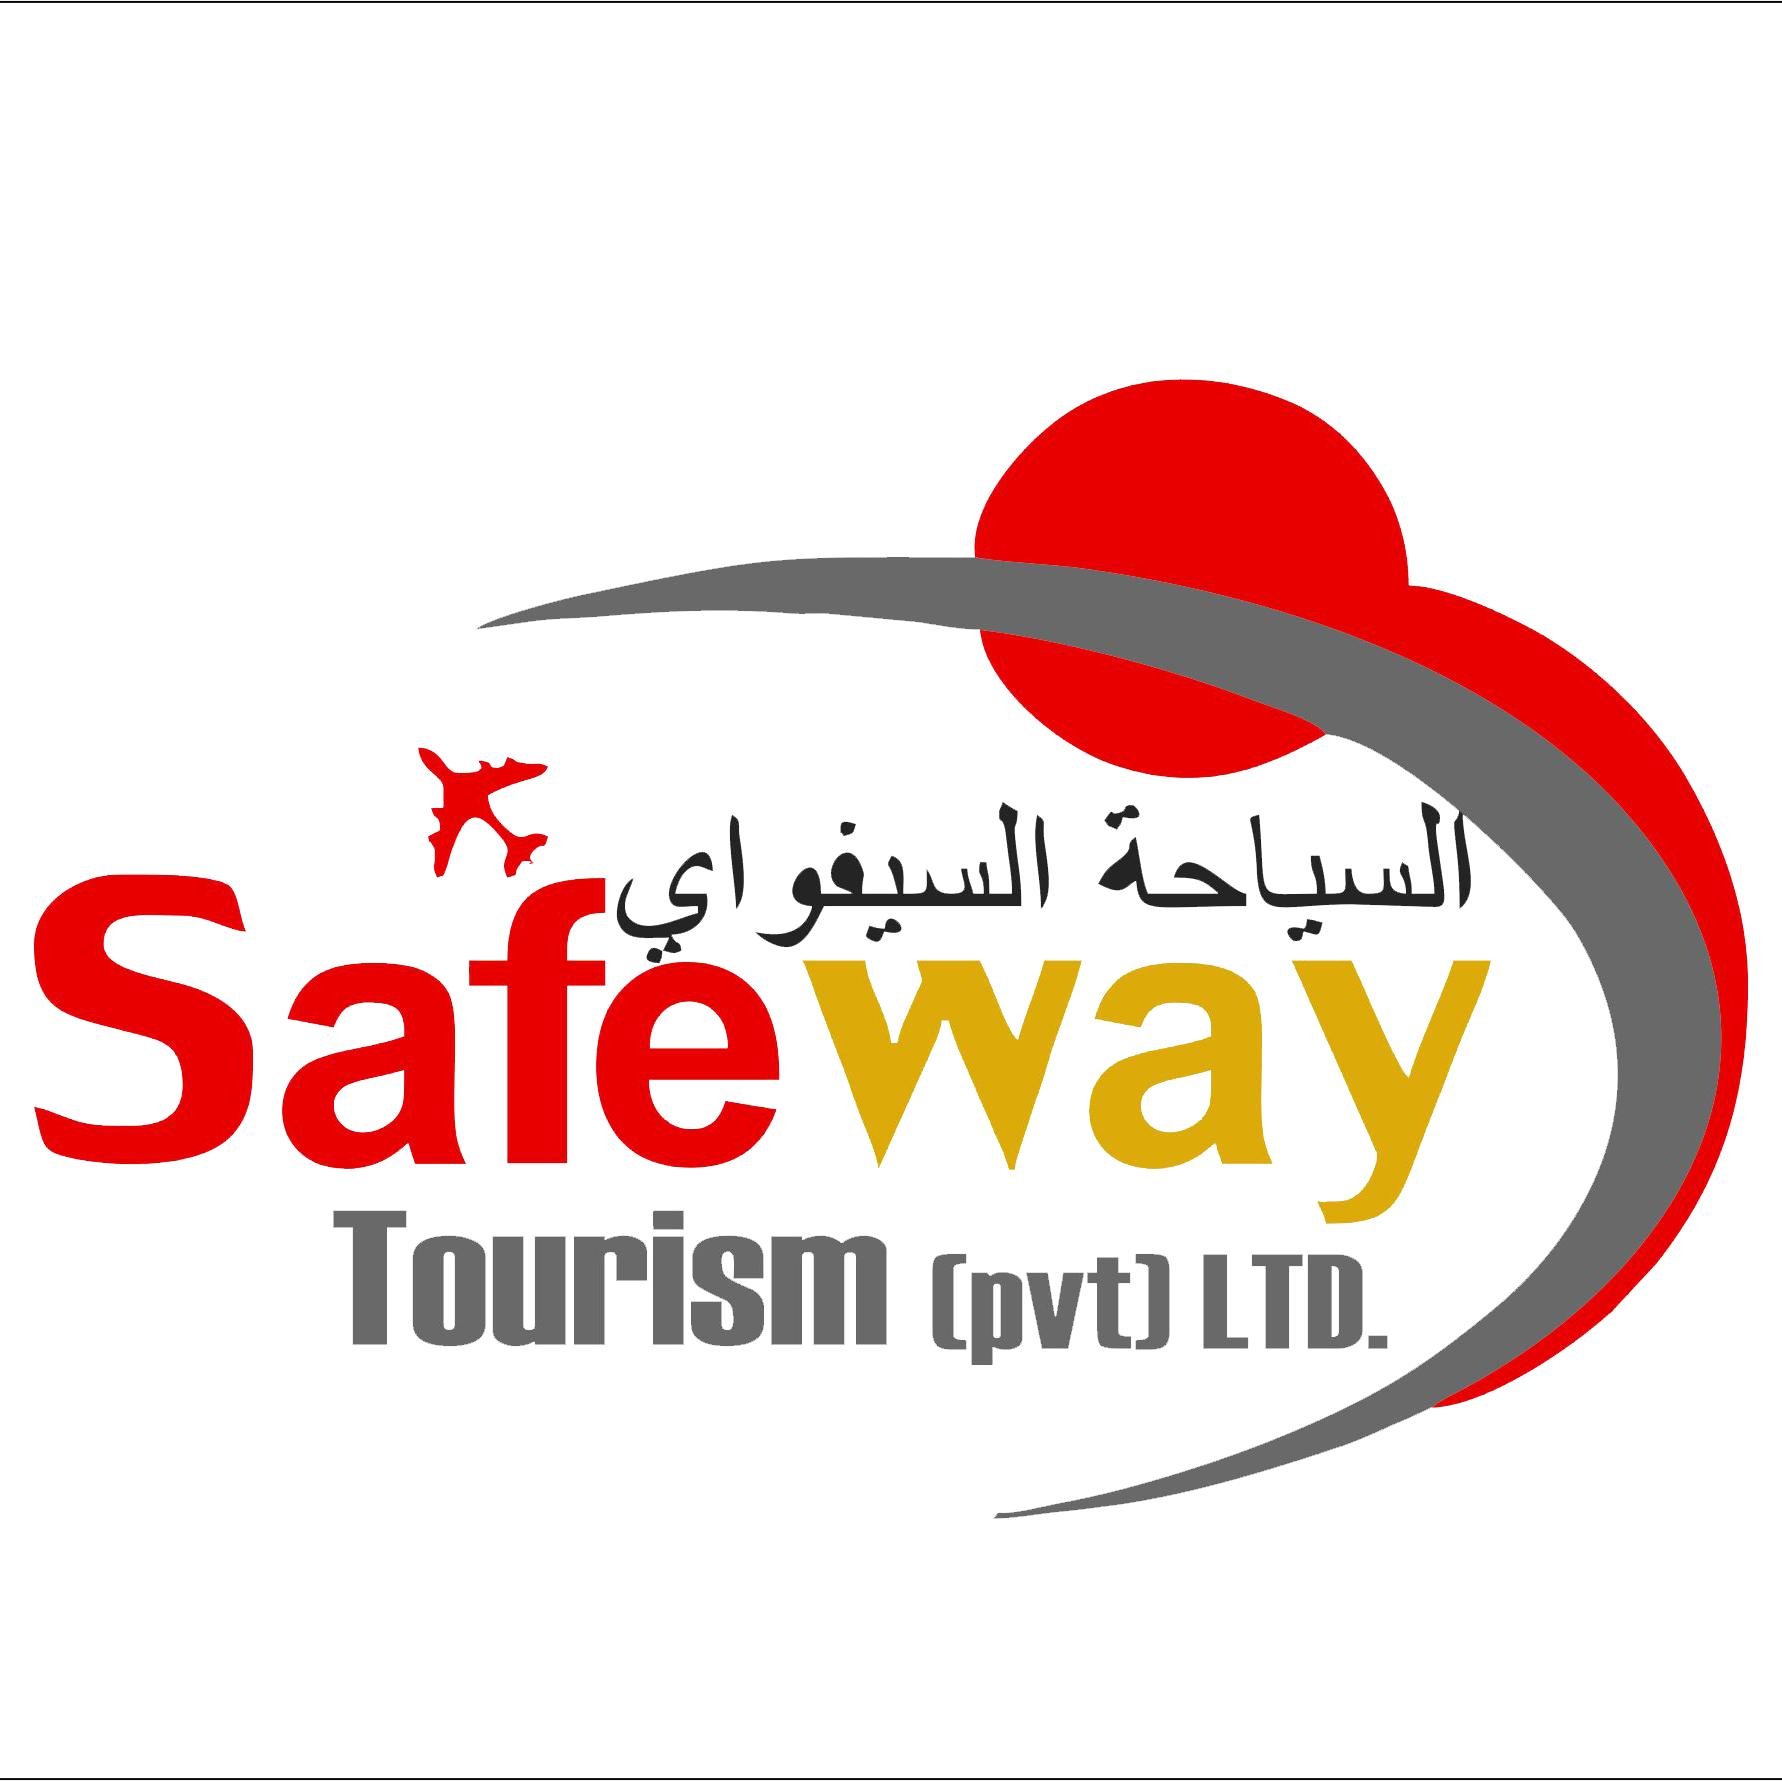 Safeway Tourism founded in 1996, provides business travel management services from our office in Islamabad.